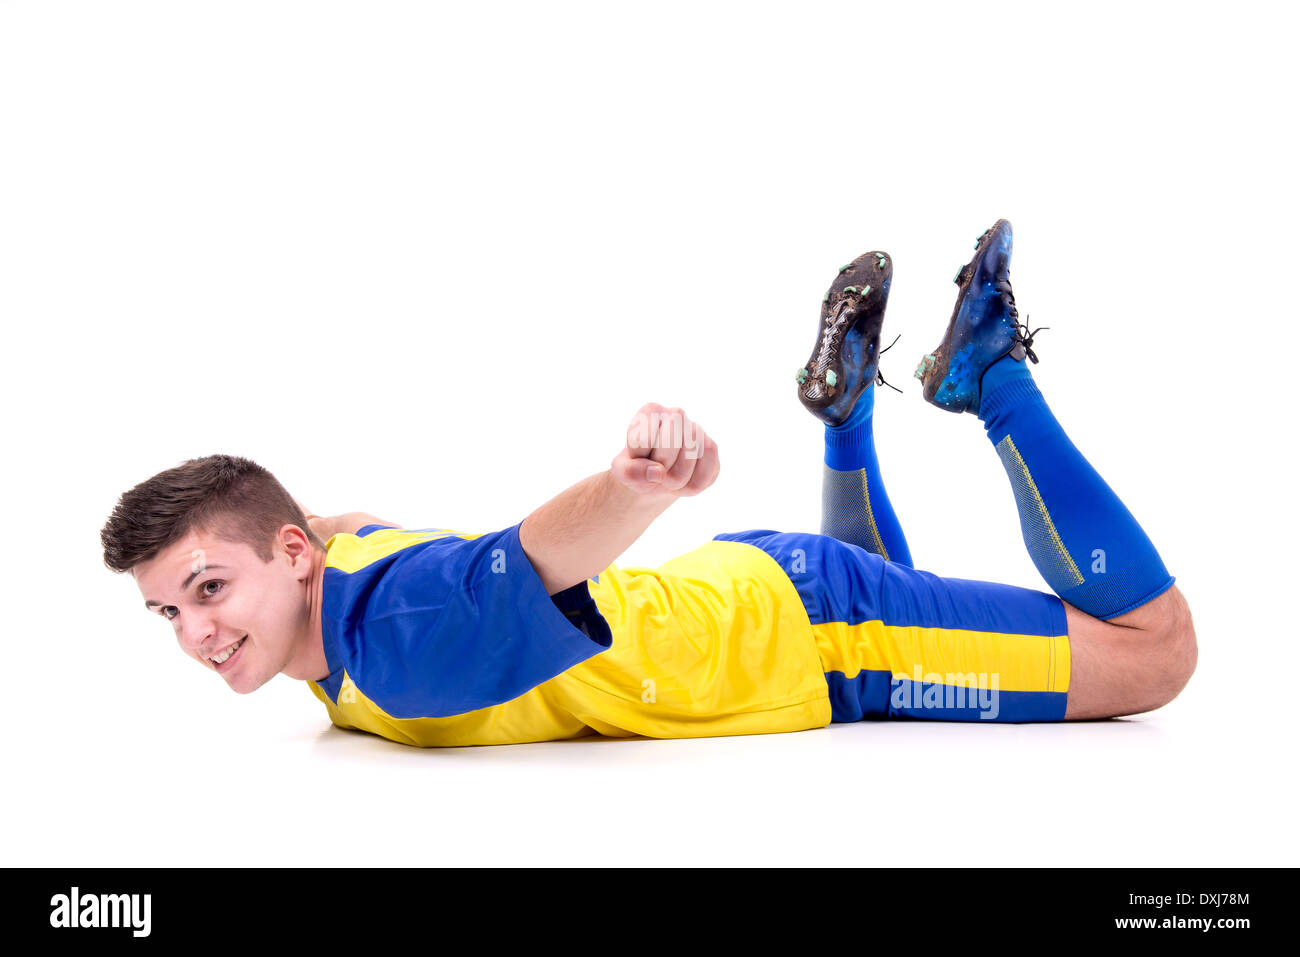 Football player celebrating a goal isolated in white Stock Photo